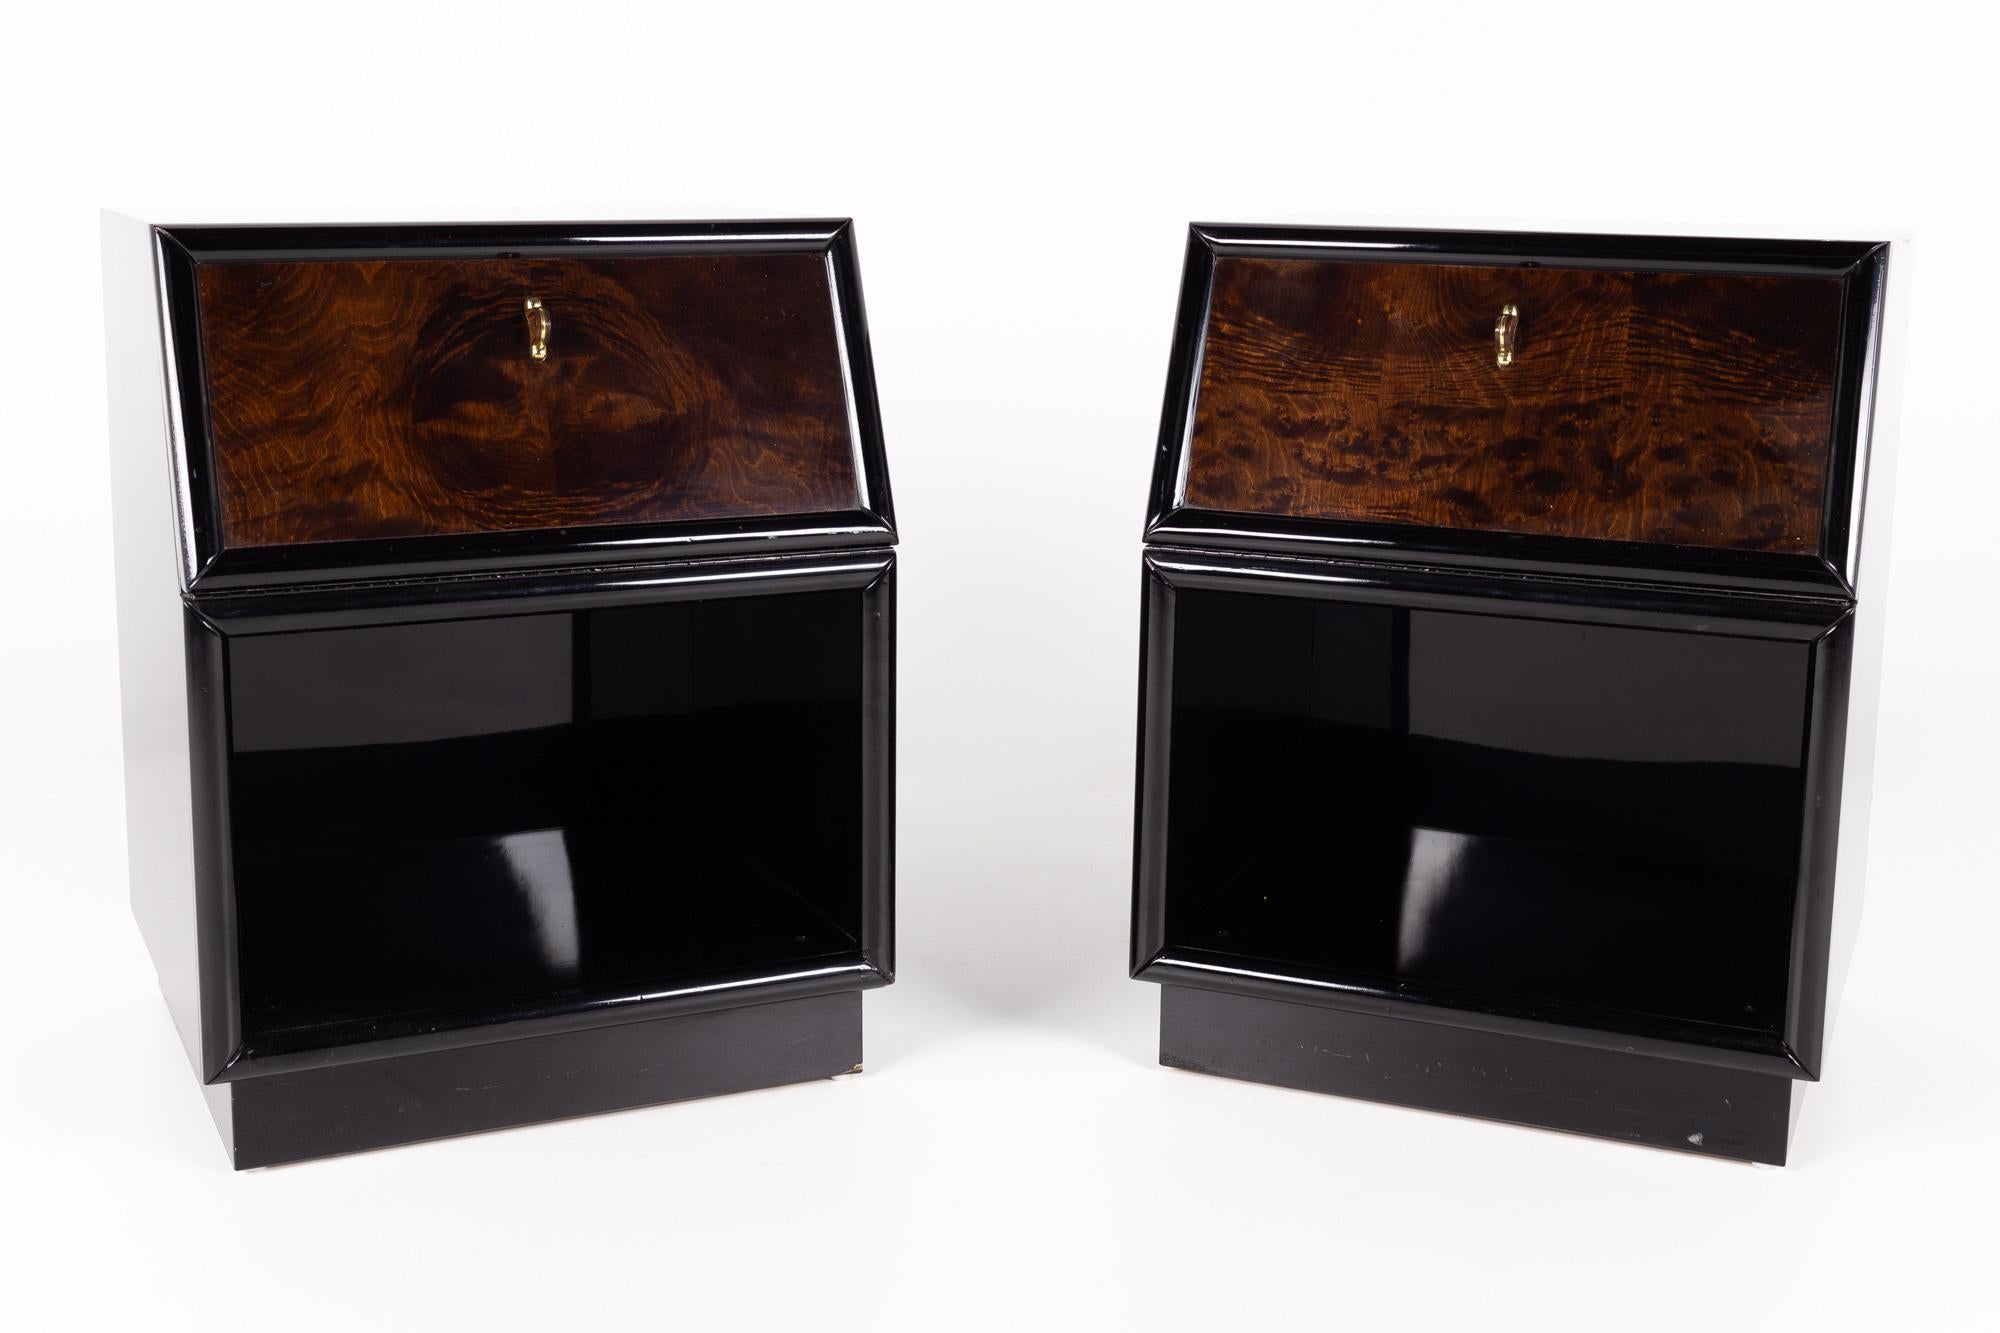 Henredon scene three contemporary walnut and brass ebonized nightstands - pair

Each nightstand measures: 22 wide x 19 deep x 28.5 inches high

This set is in great vintage condition - there is a crack in wood of bottom left corner of one piece. A